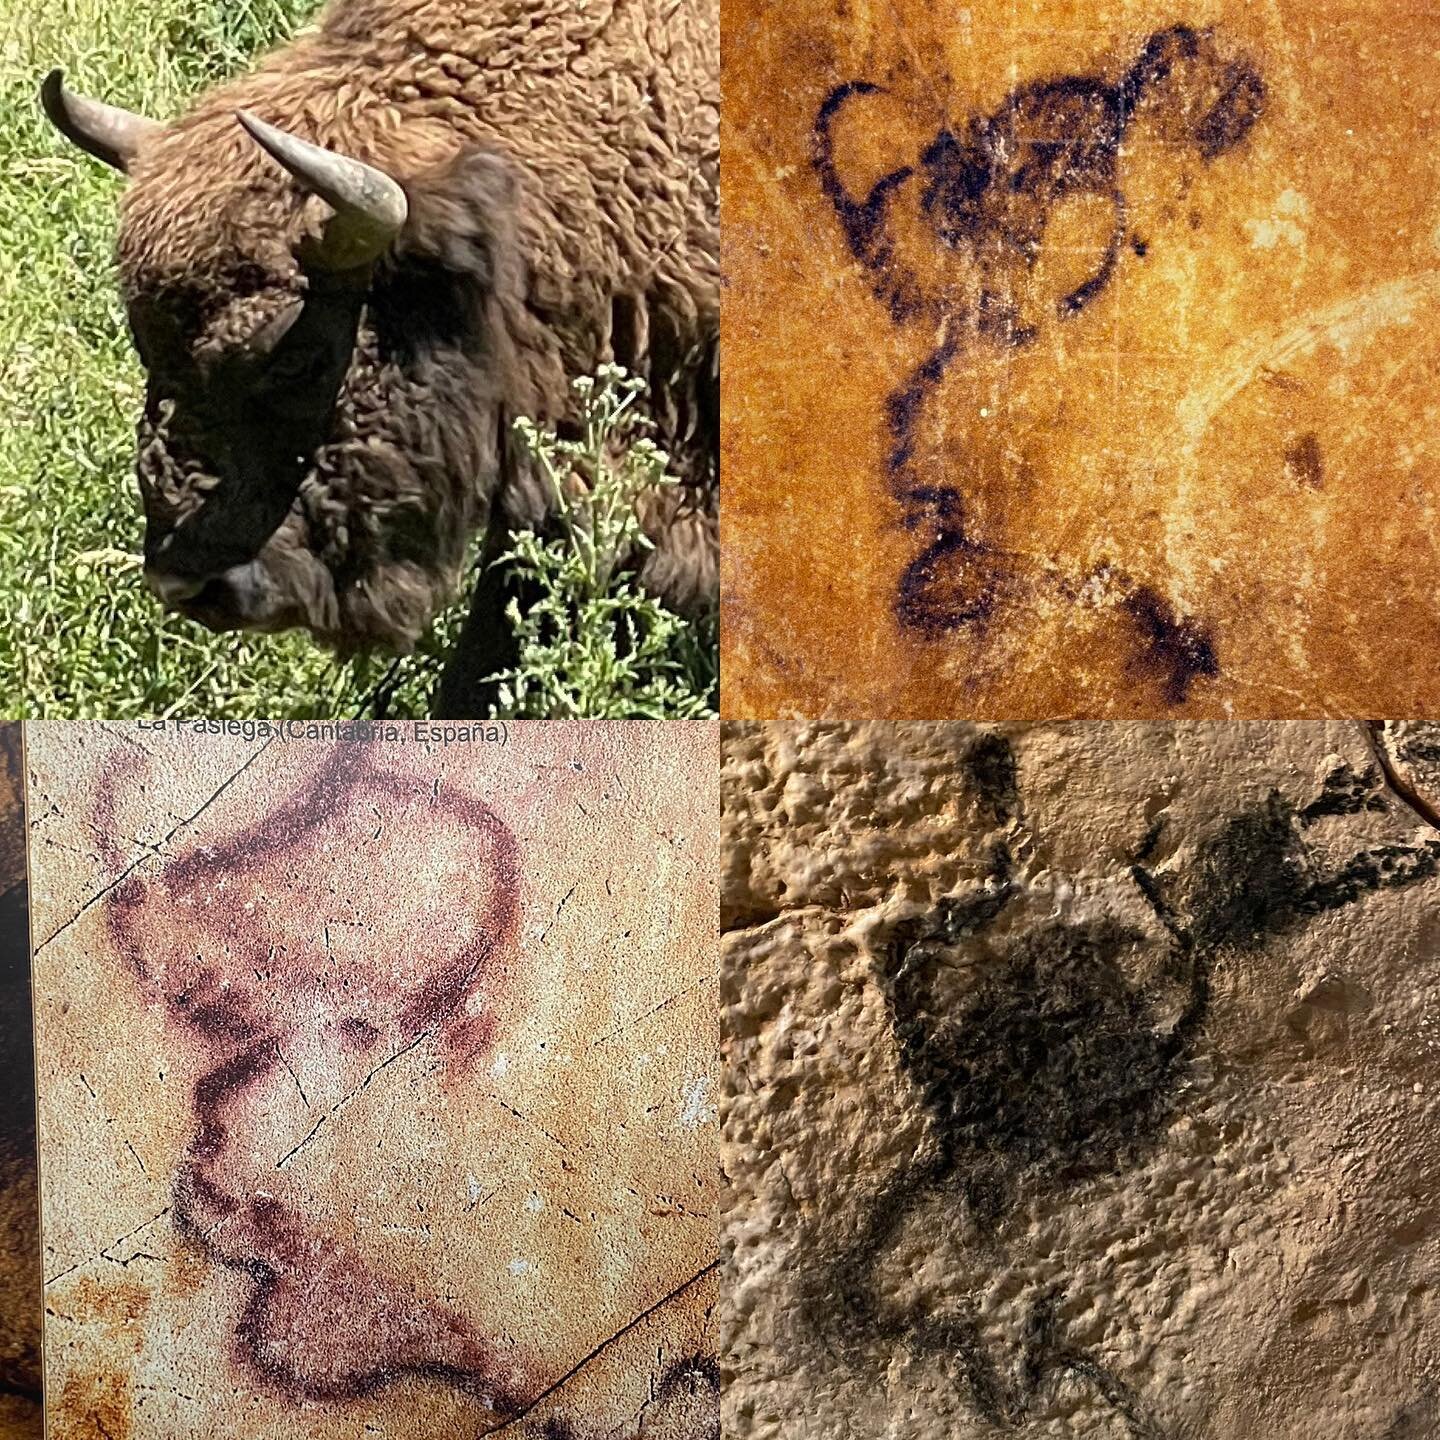 Bison? 

Four different bison.  A live one and three separate depictions from various caves in Spain and France.  Are these simply depictions of bison?  What are your thoughts?
 
In my opinion, these are more than just bison.  The  gaze and attitude 